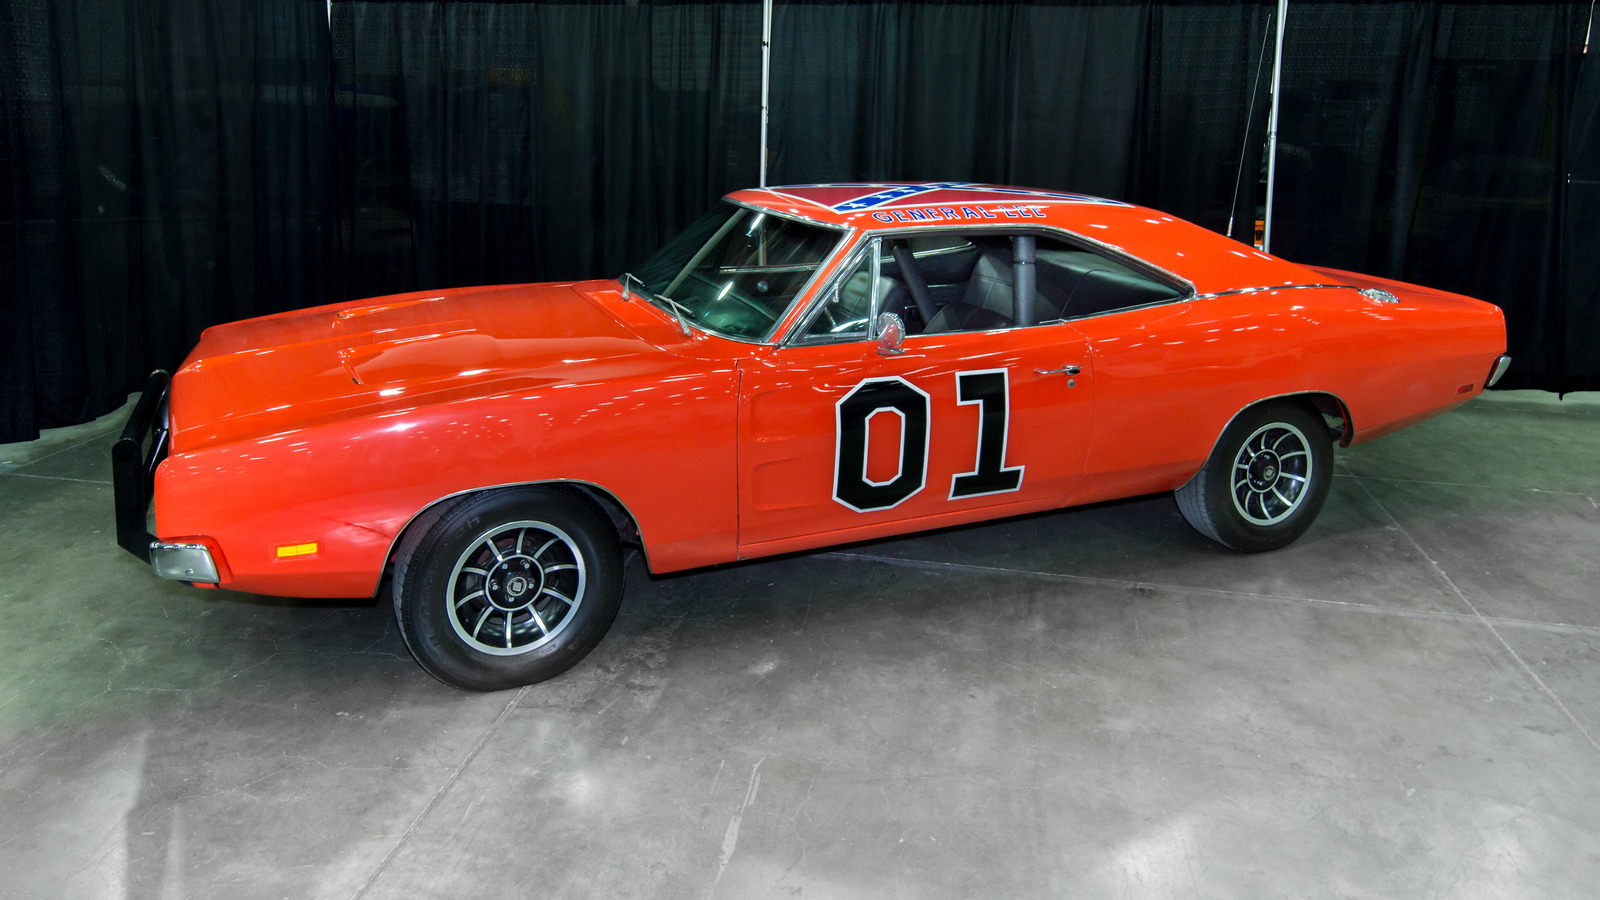 The Tragic Truth About This Dukes Of Hazzard Star's Dodge Charger